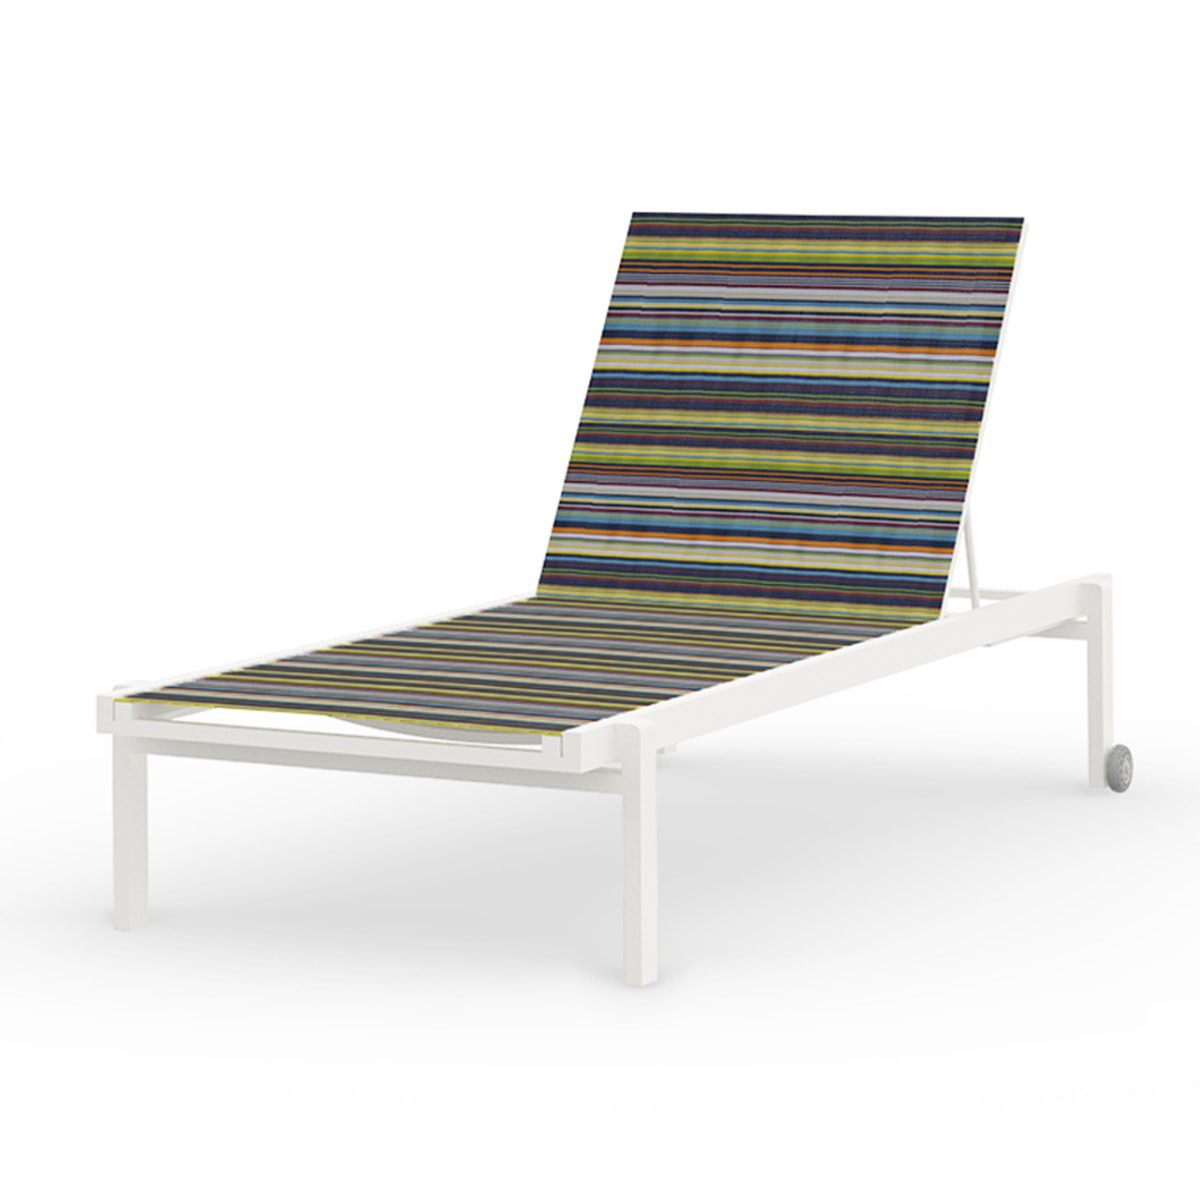 Mamagreen Stripe Lounger - Stackable - White - Green Barcode